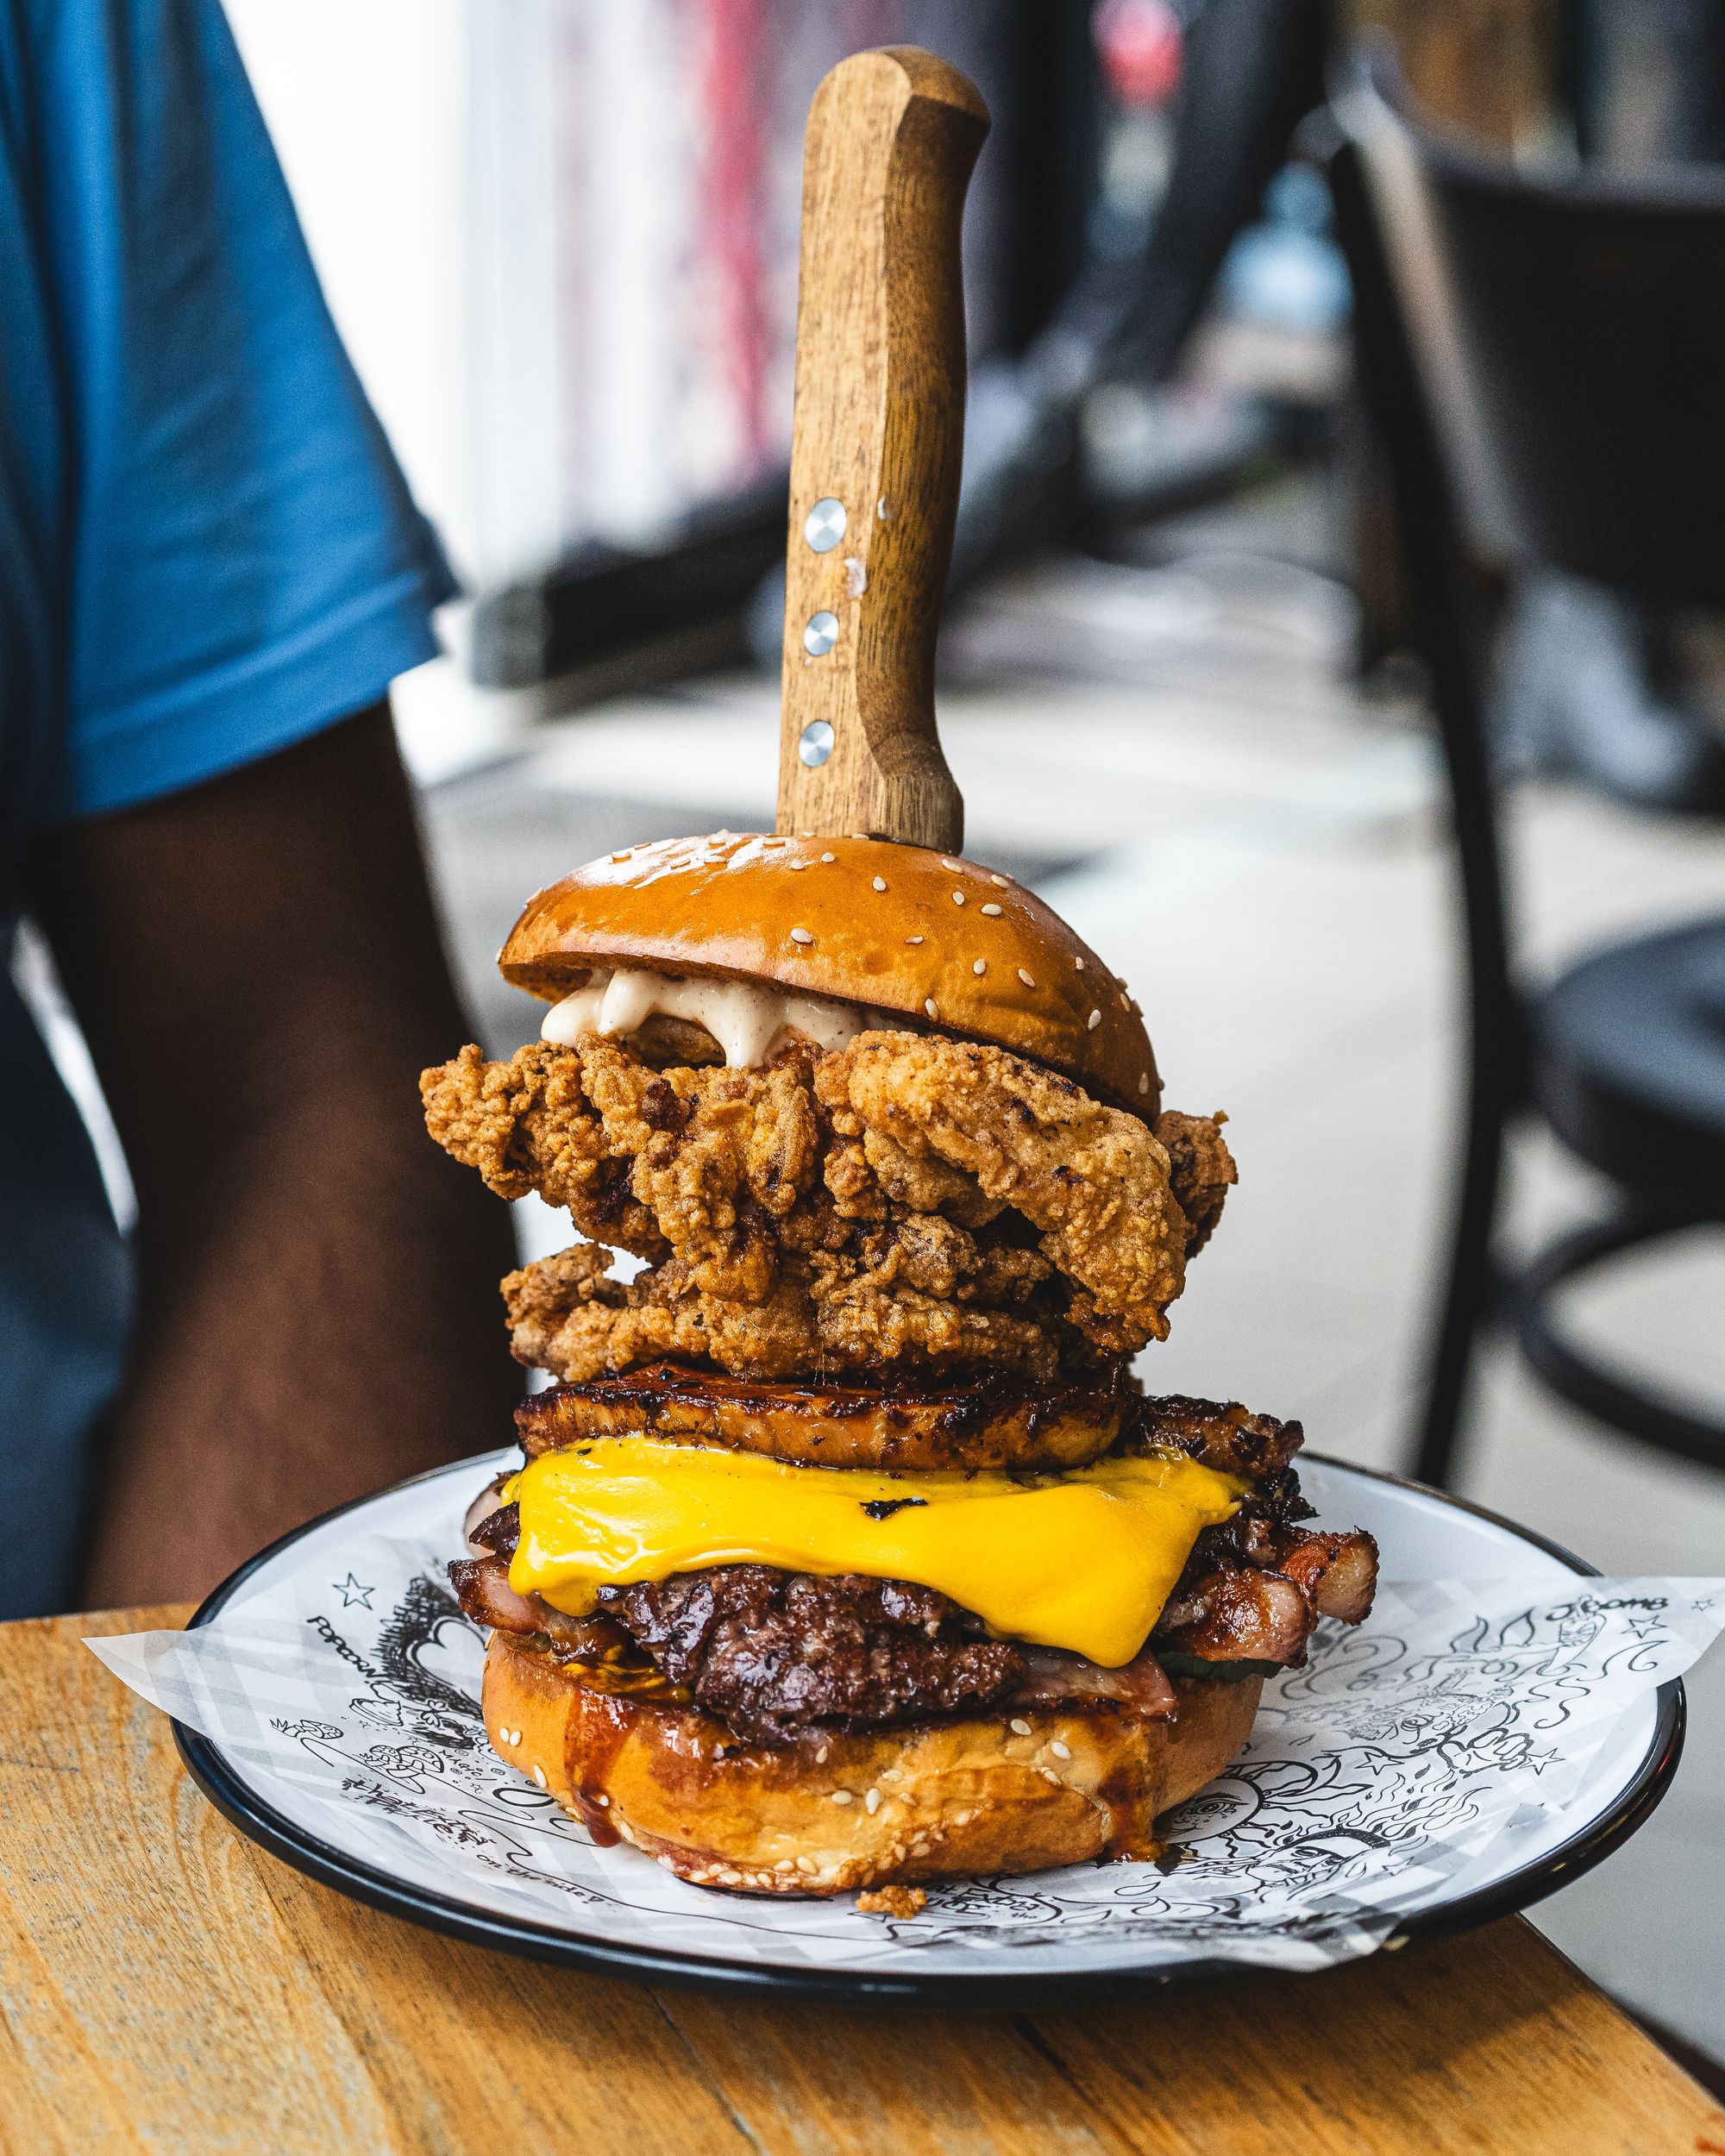 Large burger with fried chicken, melted cheese and bacon with a steak knife holding it together